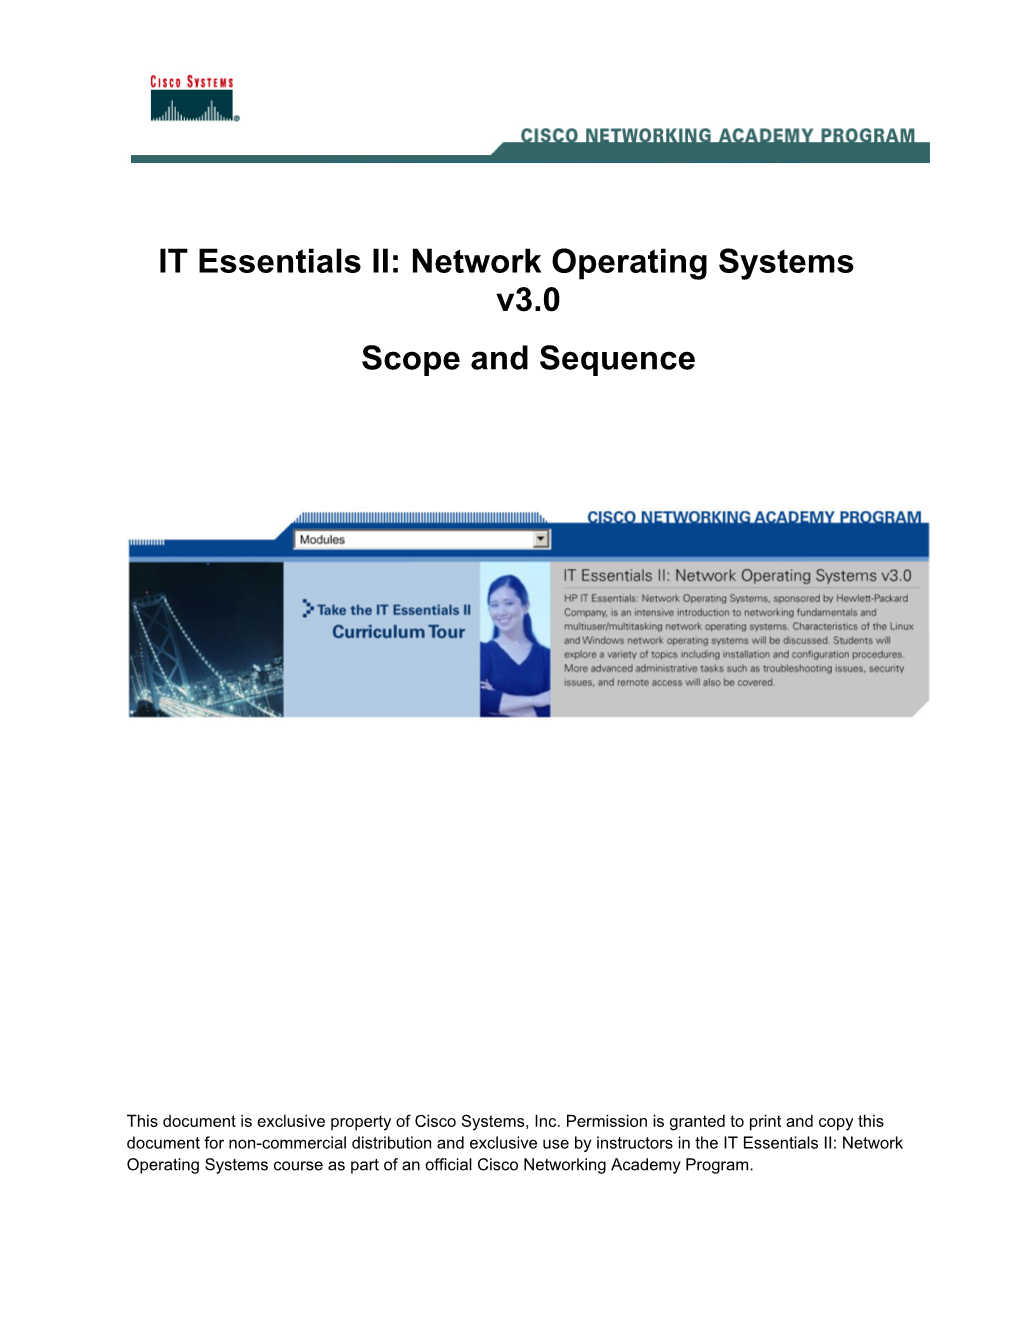 Network Operating Systems V3.0 Scope and Sequence